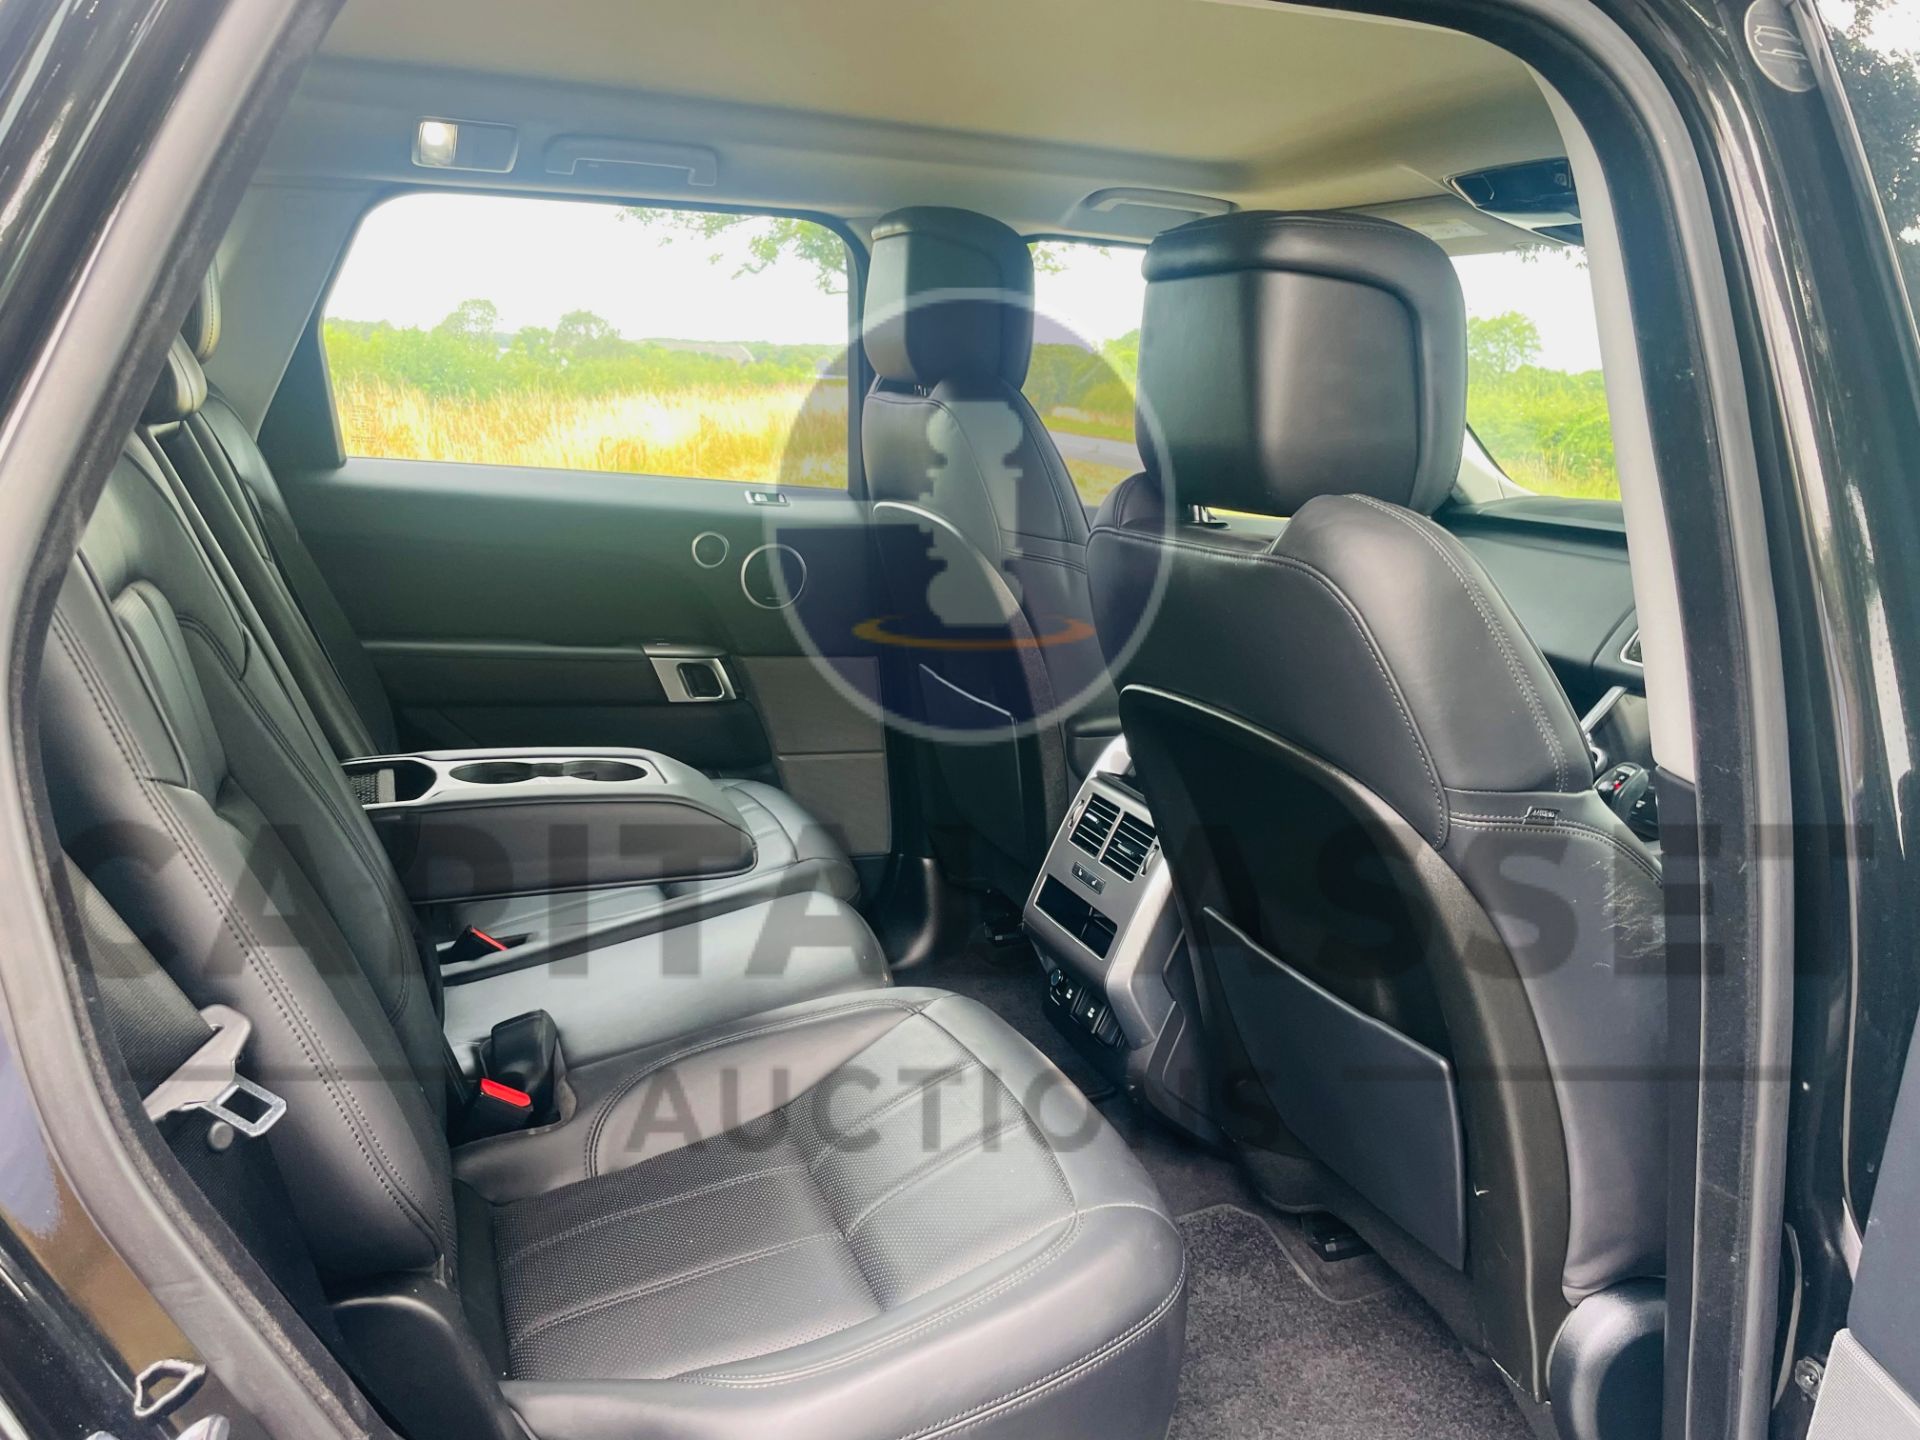 RANGE ROVER SPORT *HSE EDITION* SUV (2018 - NEW MODEL) EURO 6 DIESEL - 8 SPEED AUTOMATIC *HUGE SPEC* - Image 33 of 60